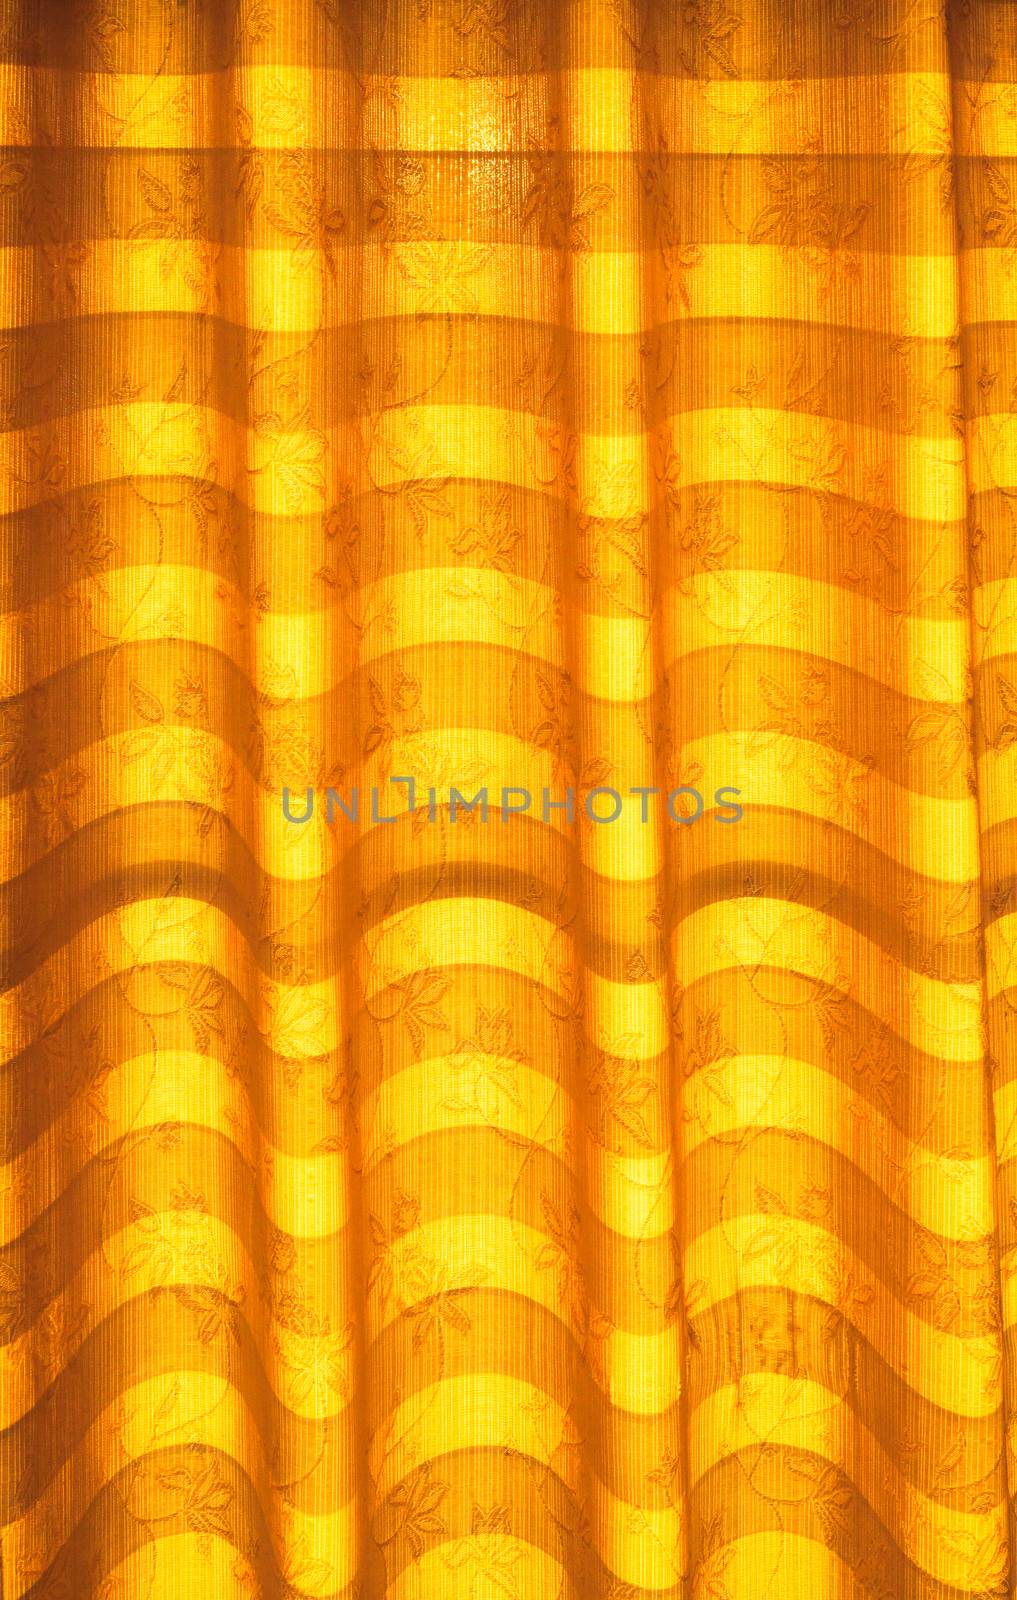 Warm tone blinds or curtains and abstract natural sunlight .